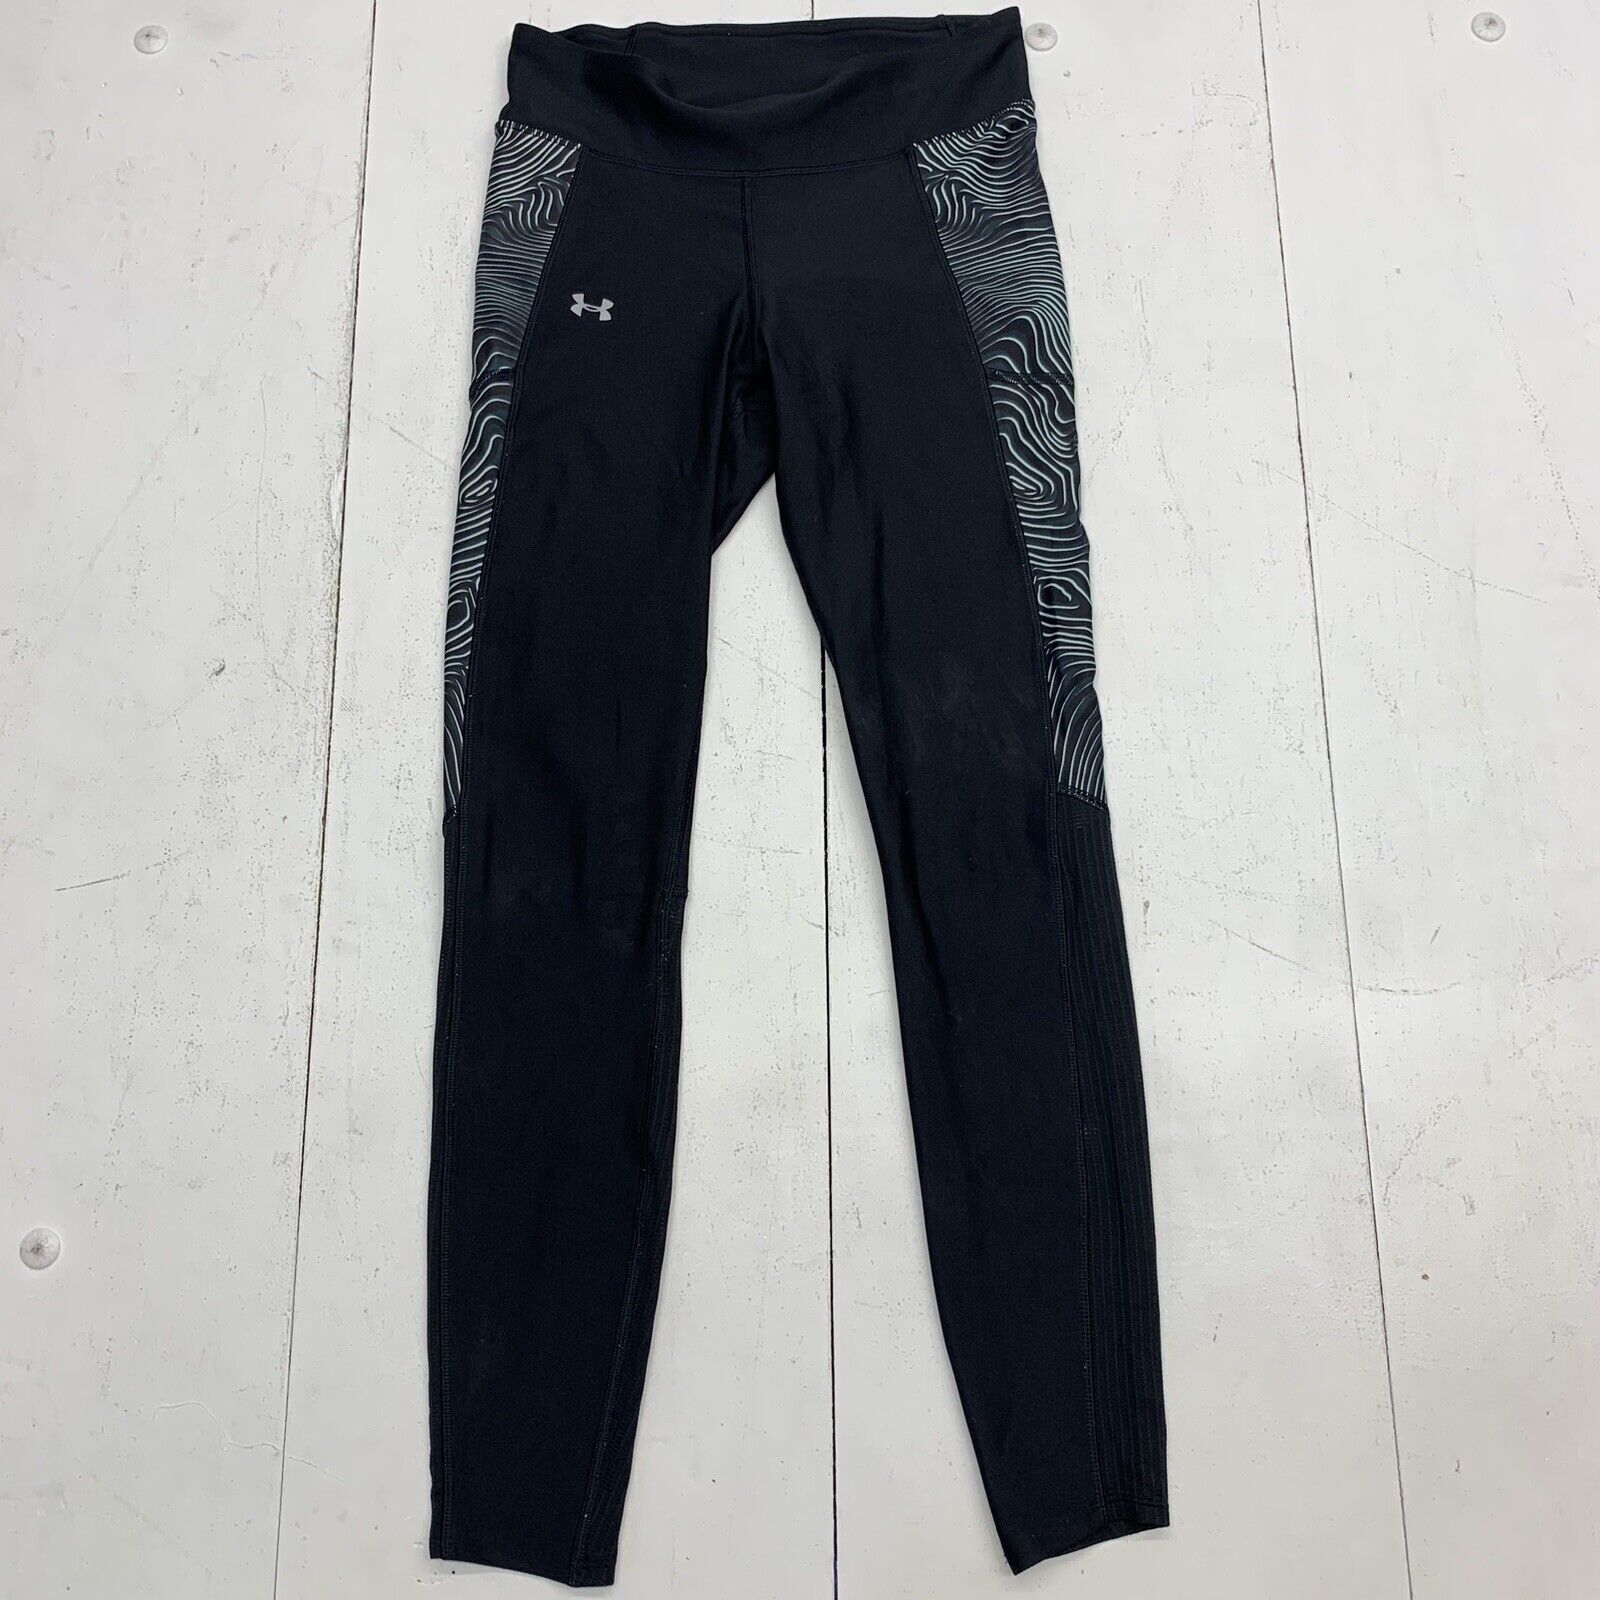 Under Armour Womens Black athletic leggings size small - beyond exchange